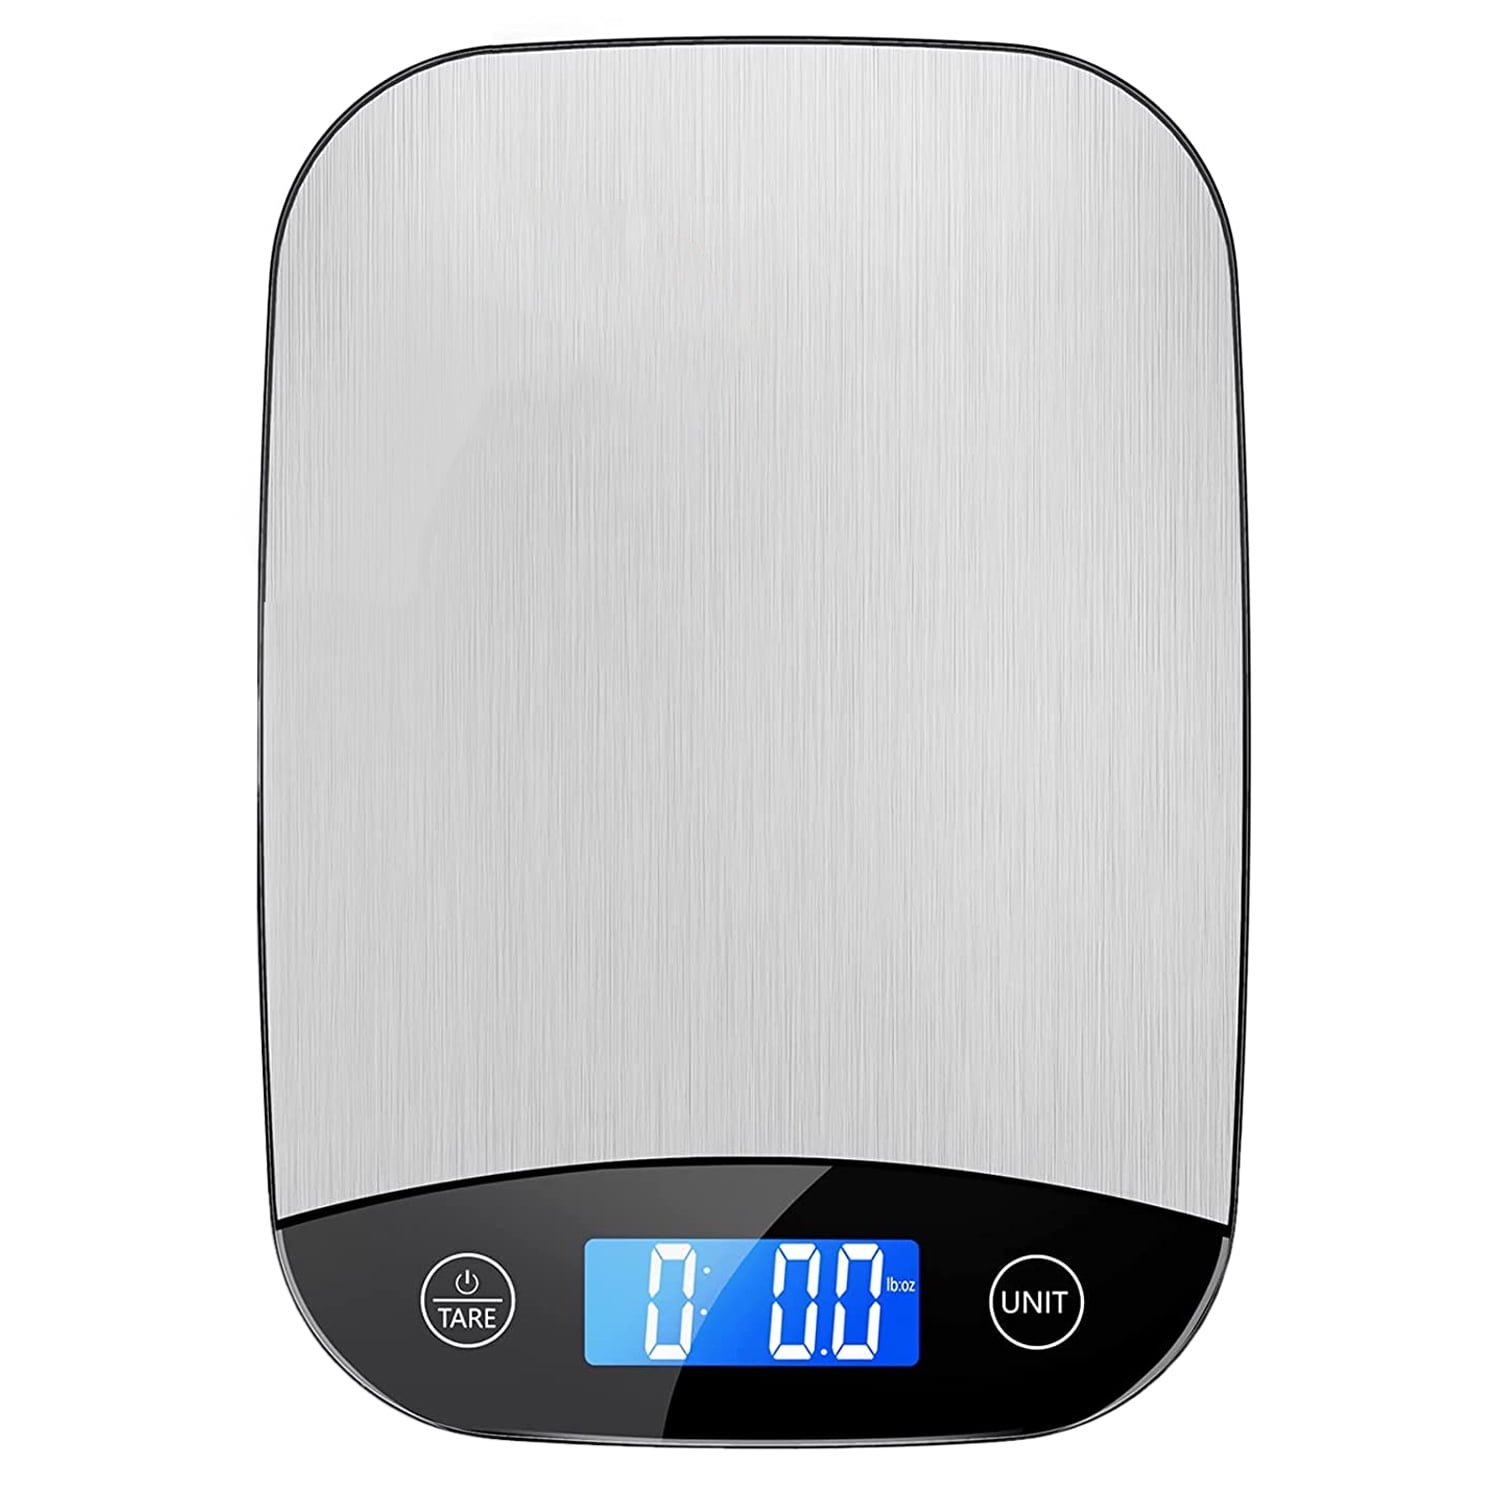  Nicewell Food Scale, 22lb Digital Kitchen Scale Weight Grams  and oz for Cooking Baking, 1g/0.1oz Precise Graduation, Stainless Steel and  Tempered Glass (Ash Silver): Home & Kitchen